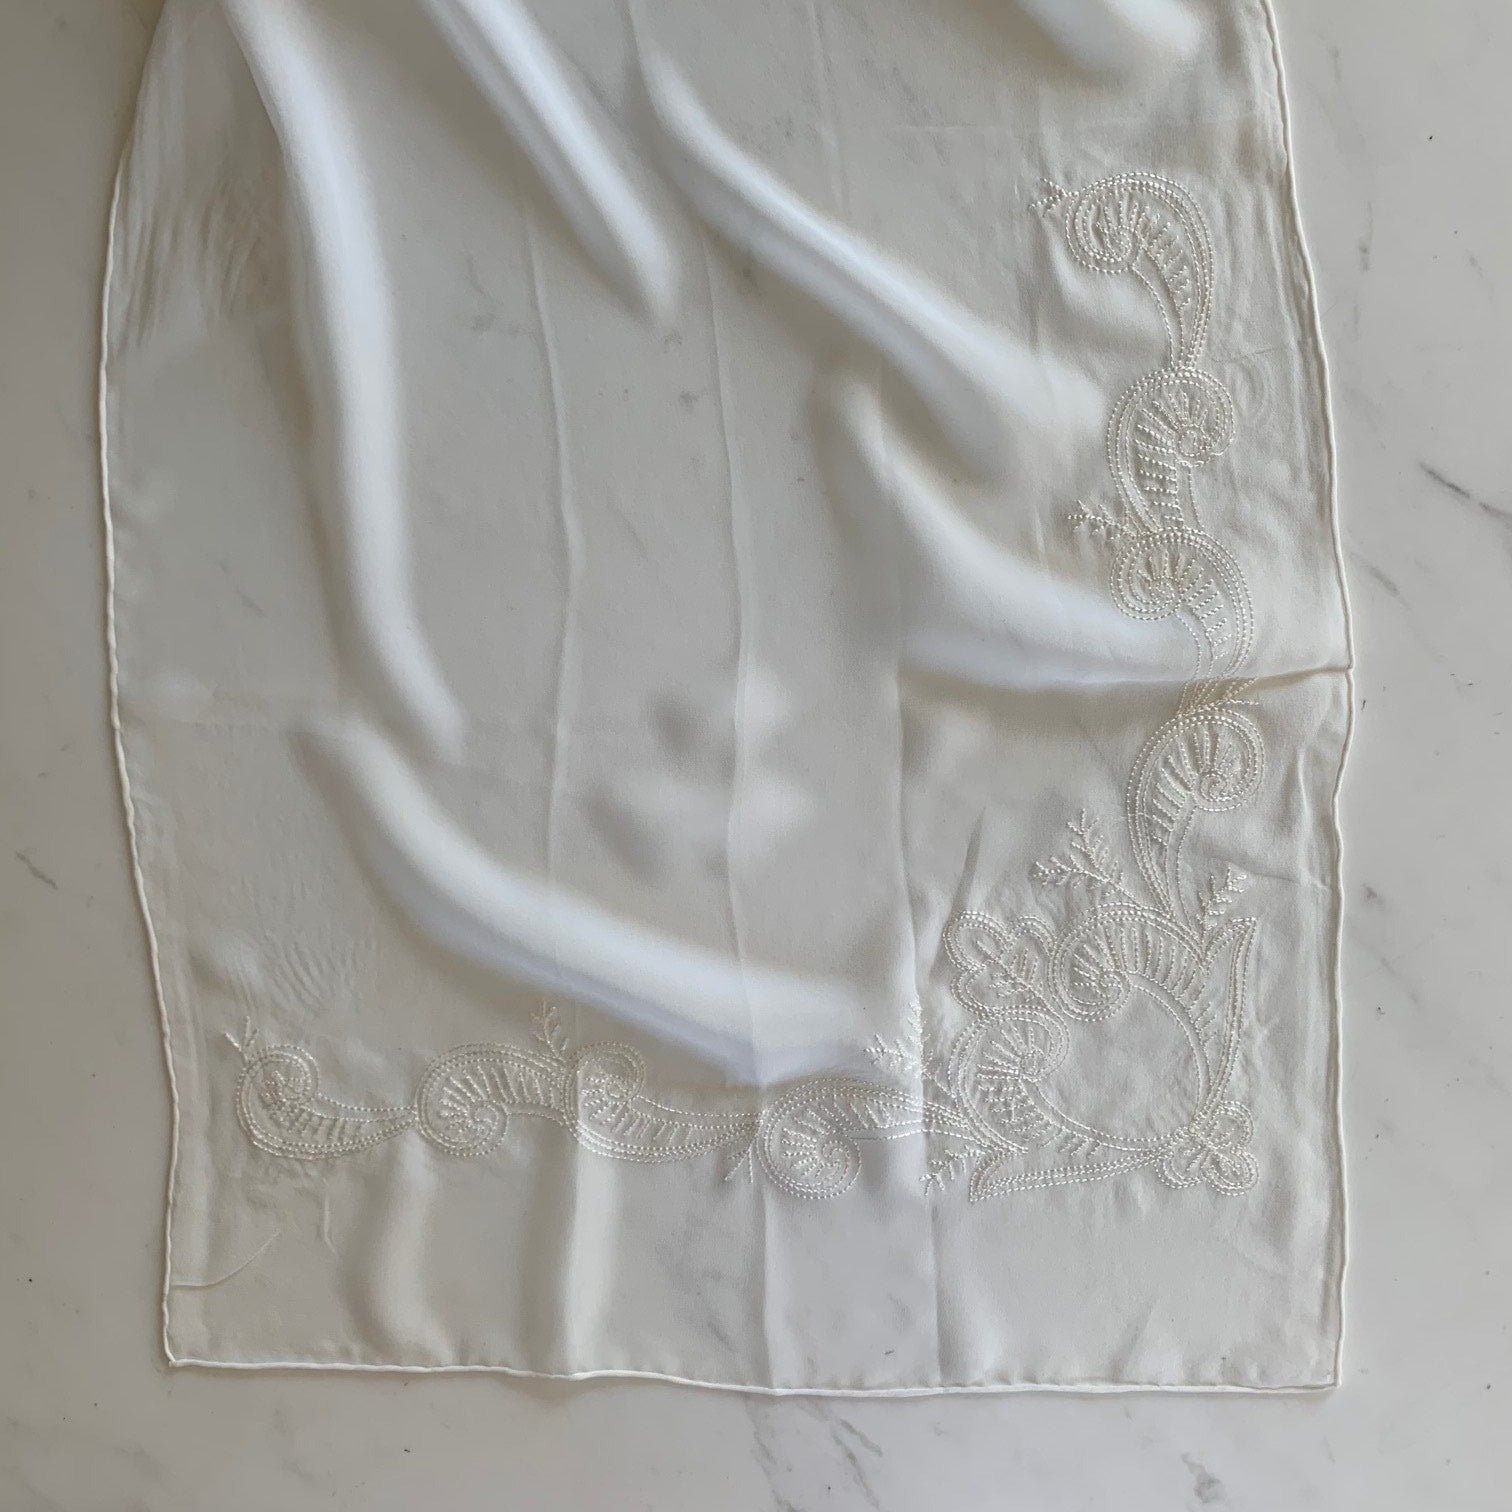 Showing Embroidered Corner Scarf a natural color light weight georgette pure silk scarf  47 by 150cm